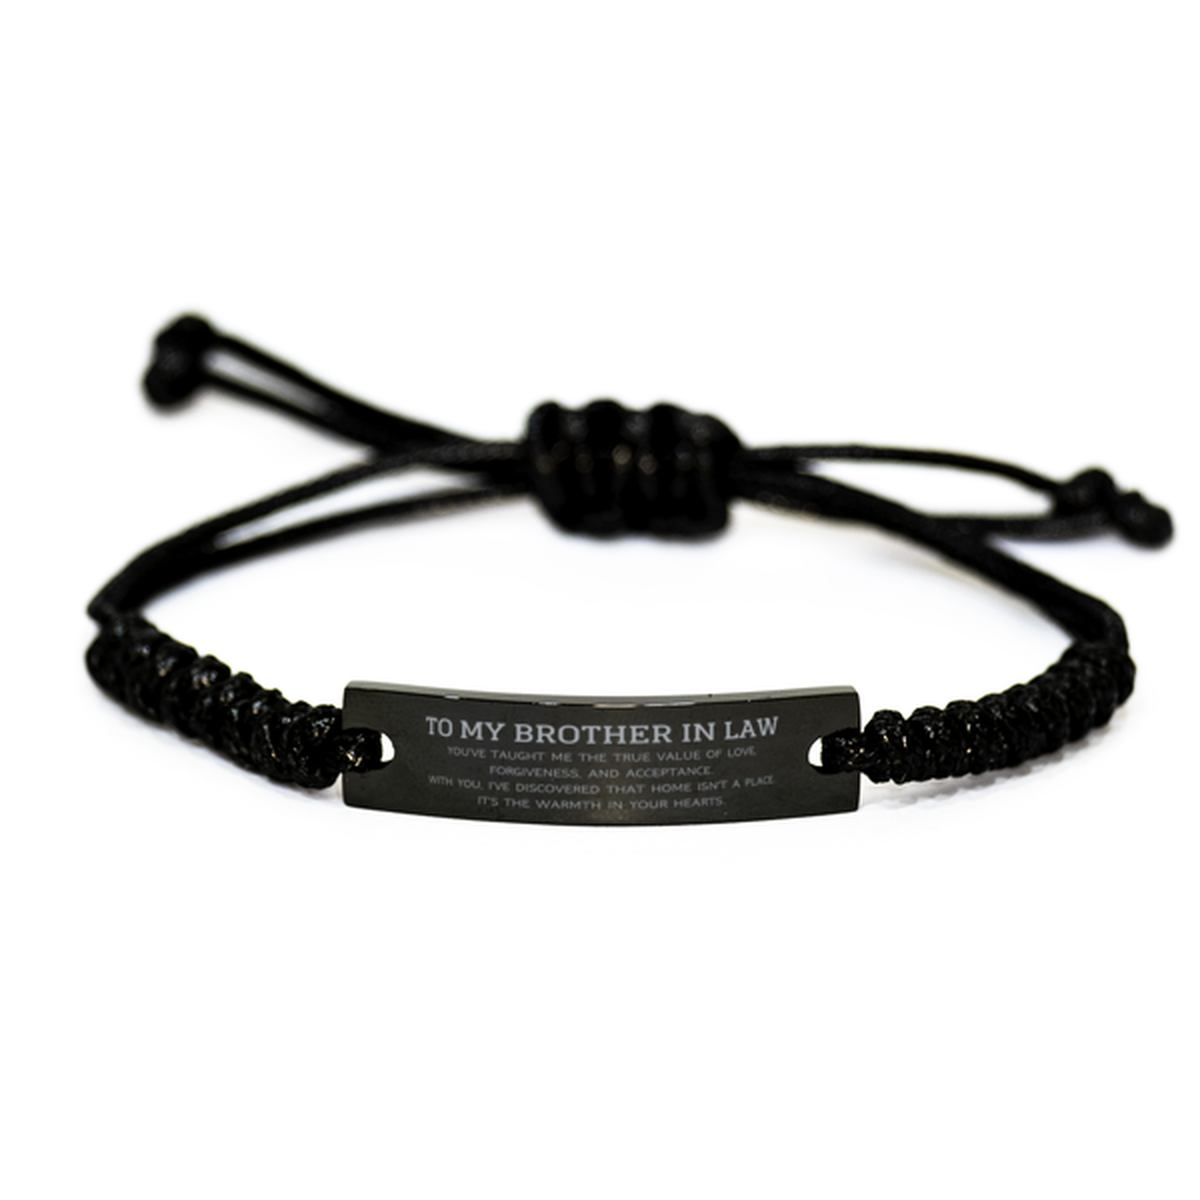 To My Brother In Law Gifts, You've taught me the true value of love, Thank You Gifts For Brother In Law, Birthday Black Rope Bracelet For Brother In Law